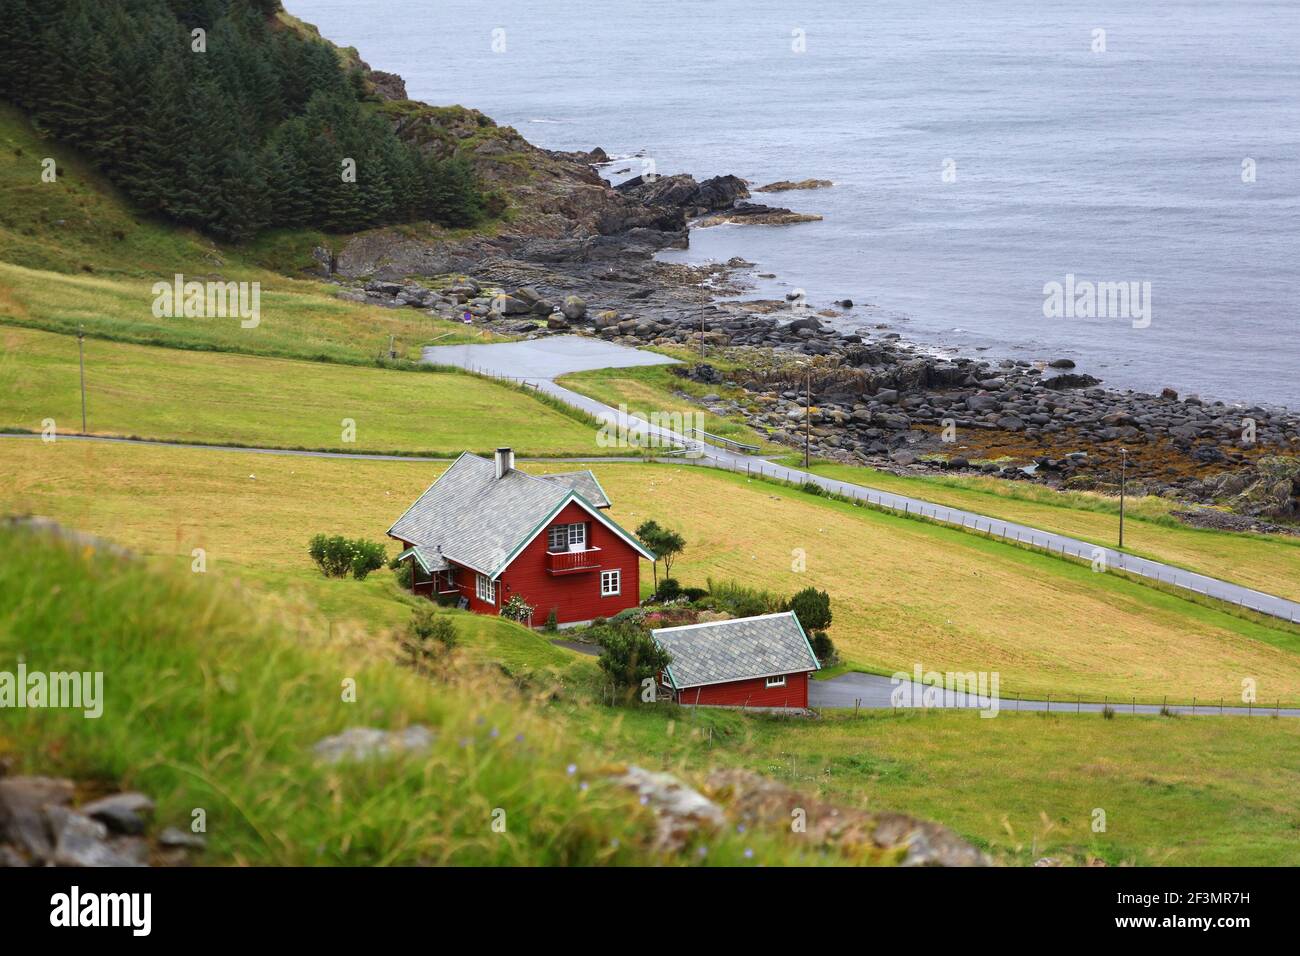 Runde island rural landscape in Norway. Traditional Norwegian village architecture style with falun red colored homes. Stock Photo